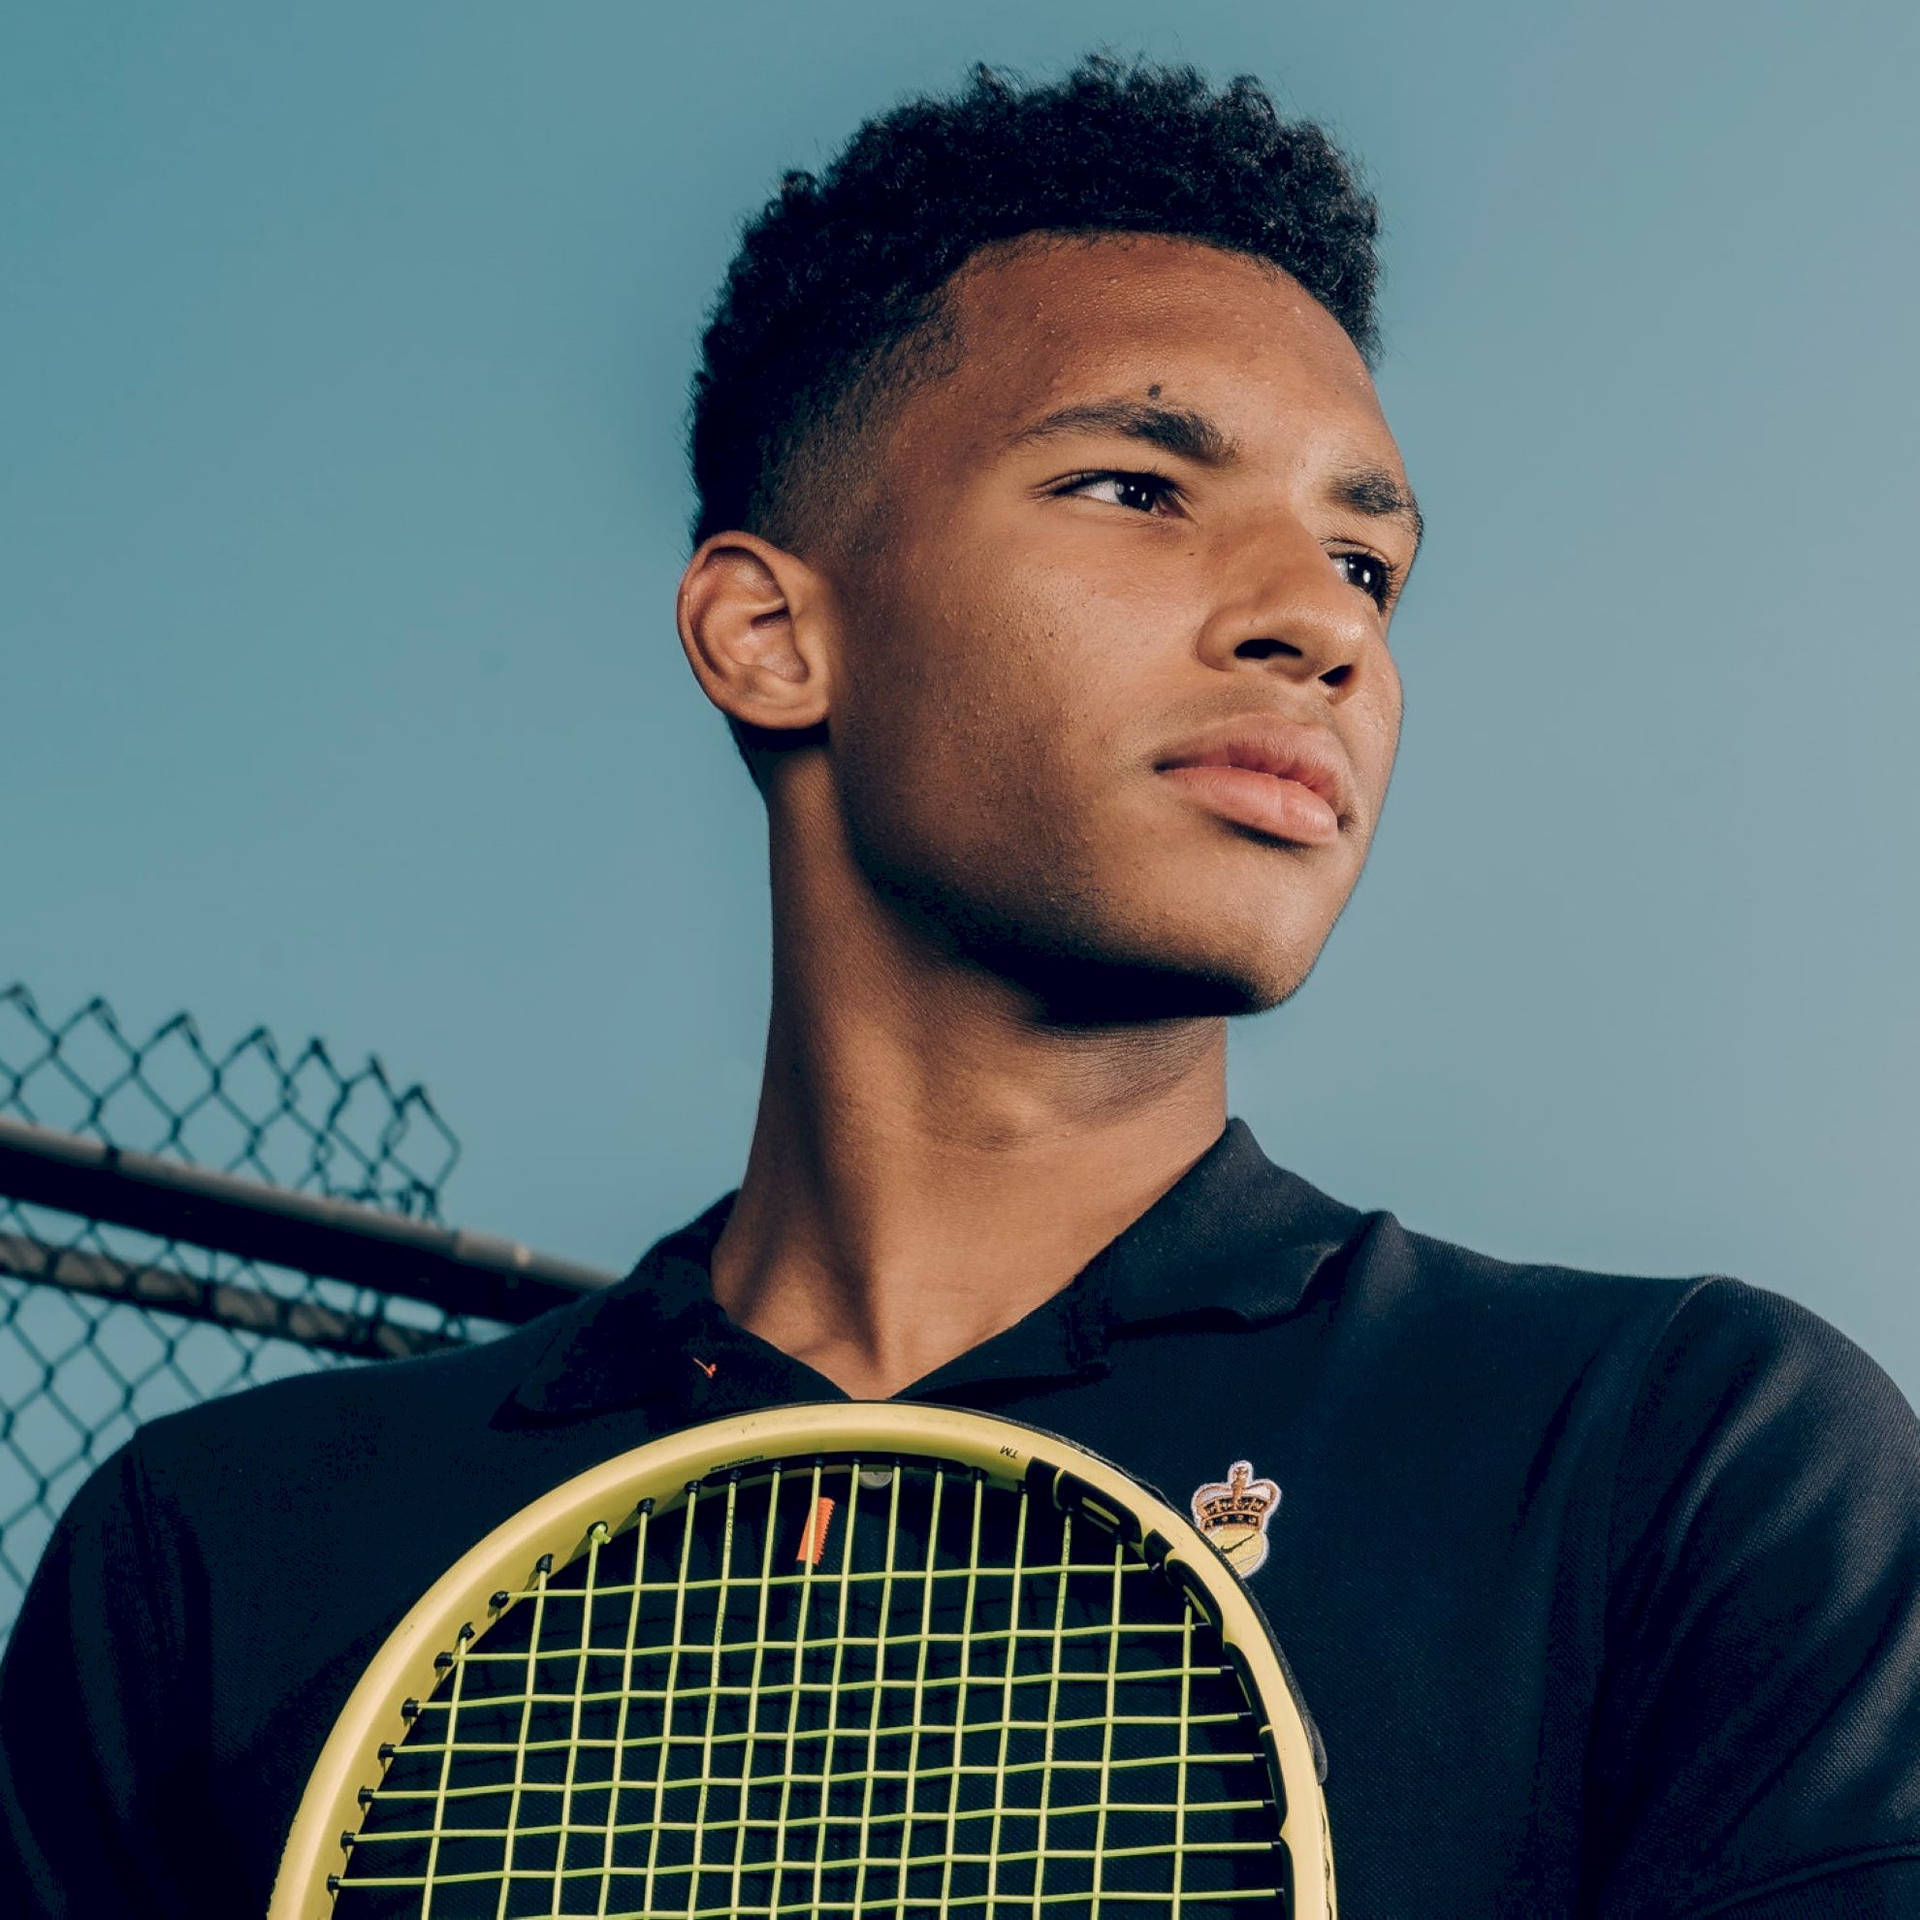 Felix Auger-aliassime In Thoughtful Contemplation Background